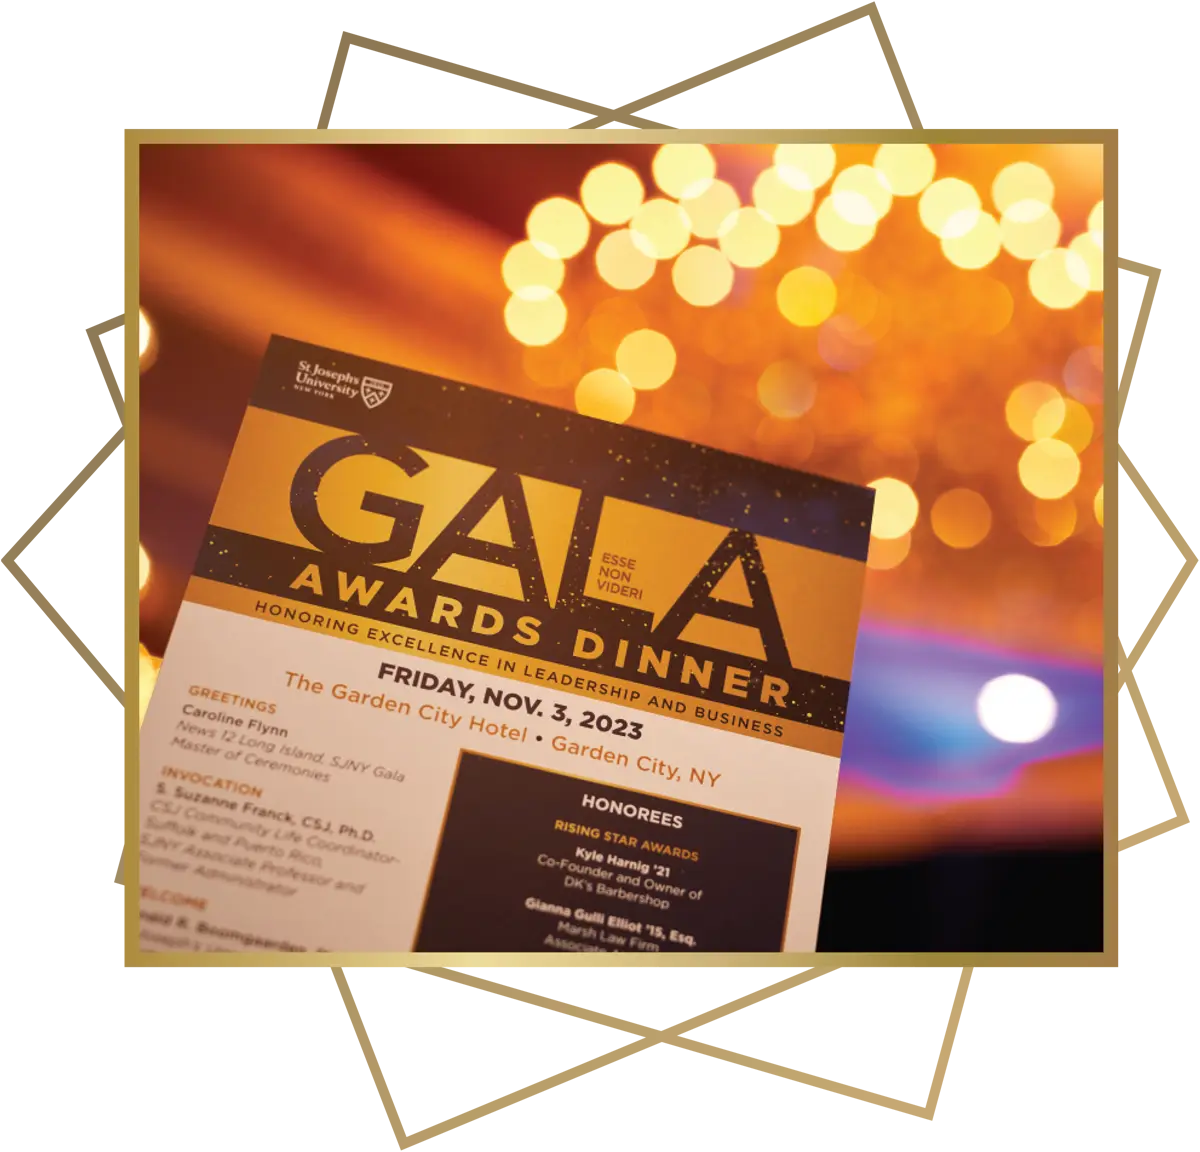 close view of the St. Joseph's University Gala Awards Dinner program, an elegant chandelier glows out of focus in the background